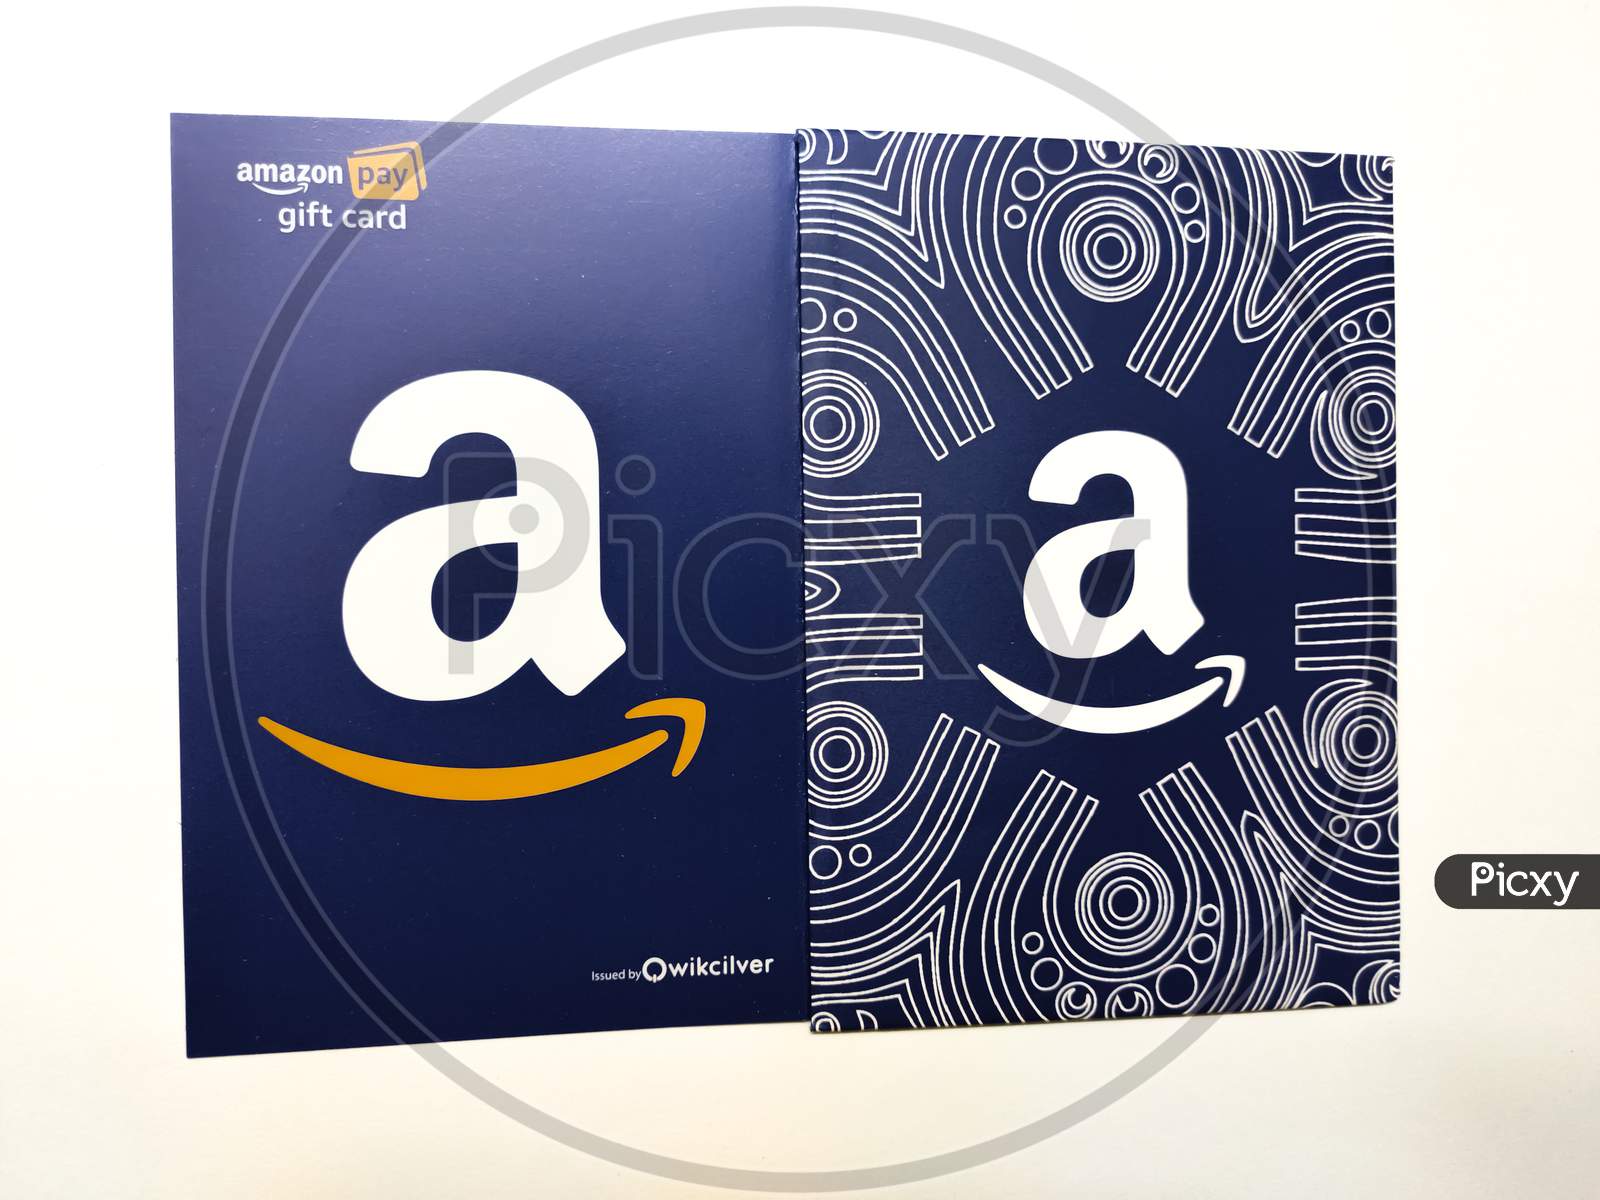 Image Of Amazon Gift Card Isolated On White Background With Space For Text Which Allows The Recipient To Purchase Items From The Amazon Com Website De Picxy